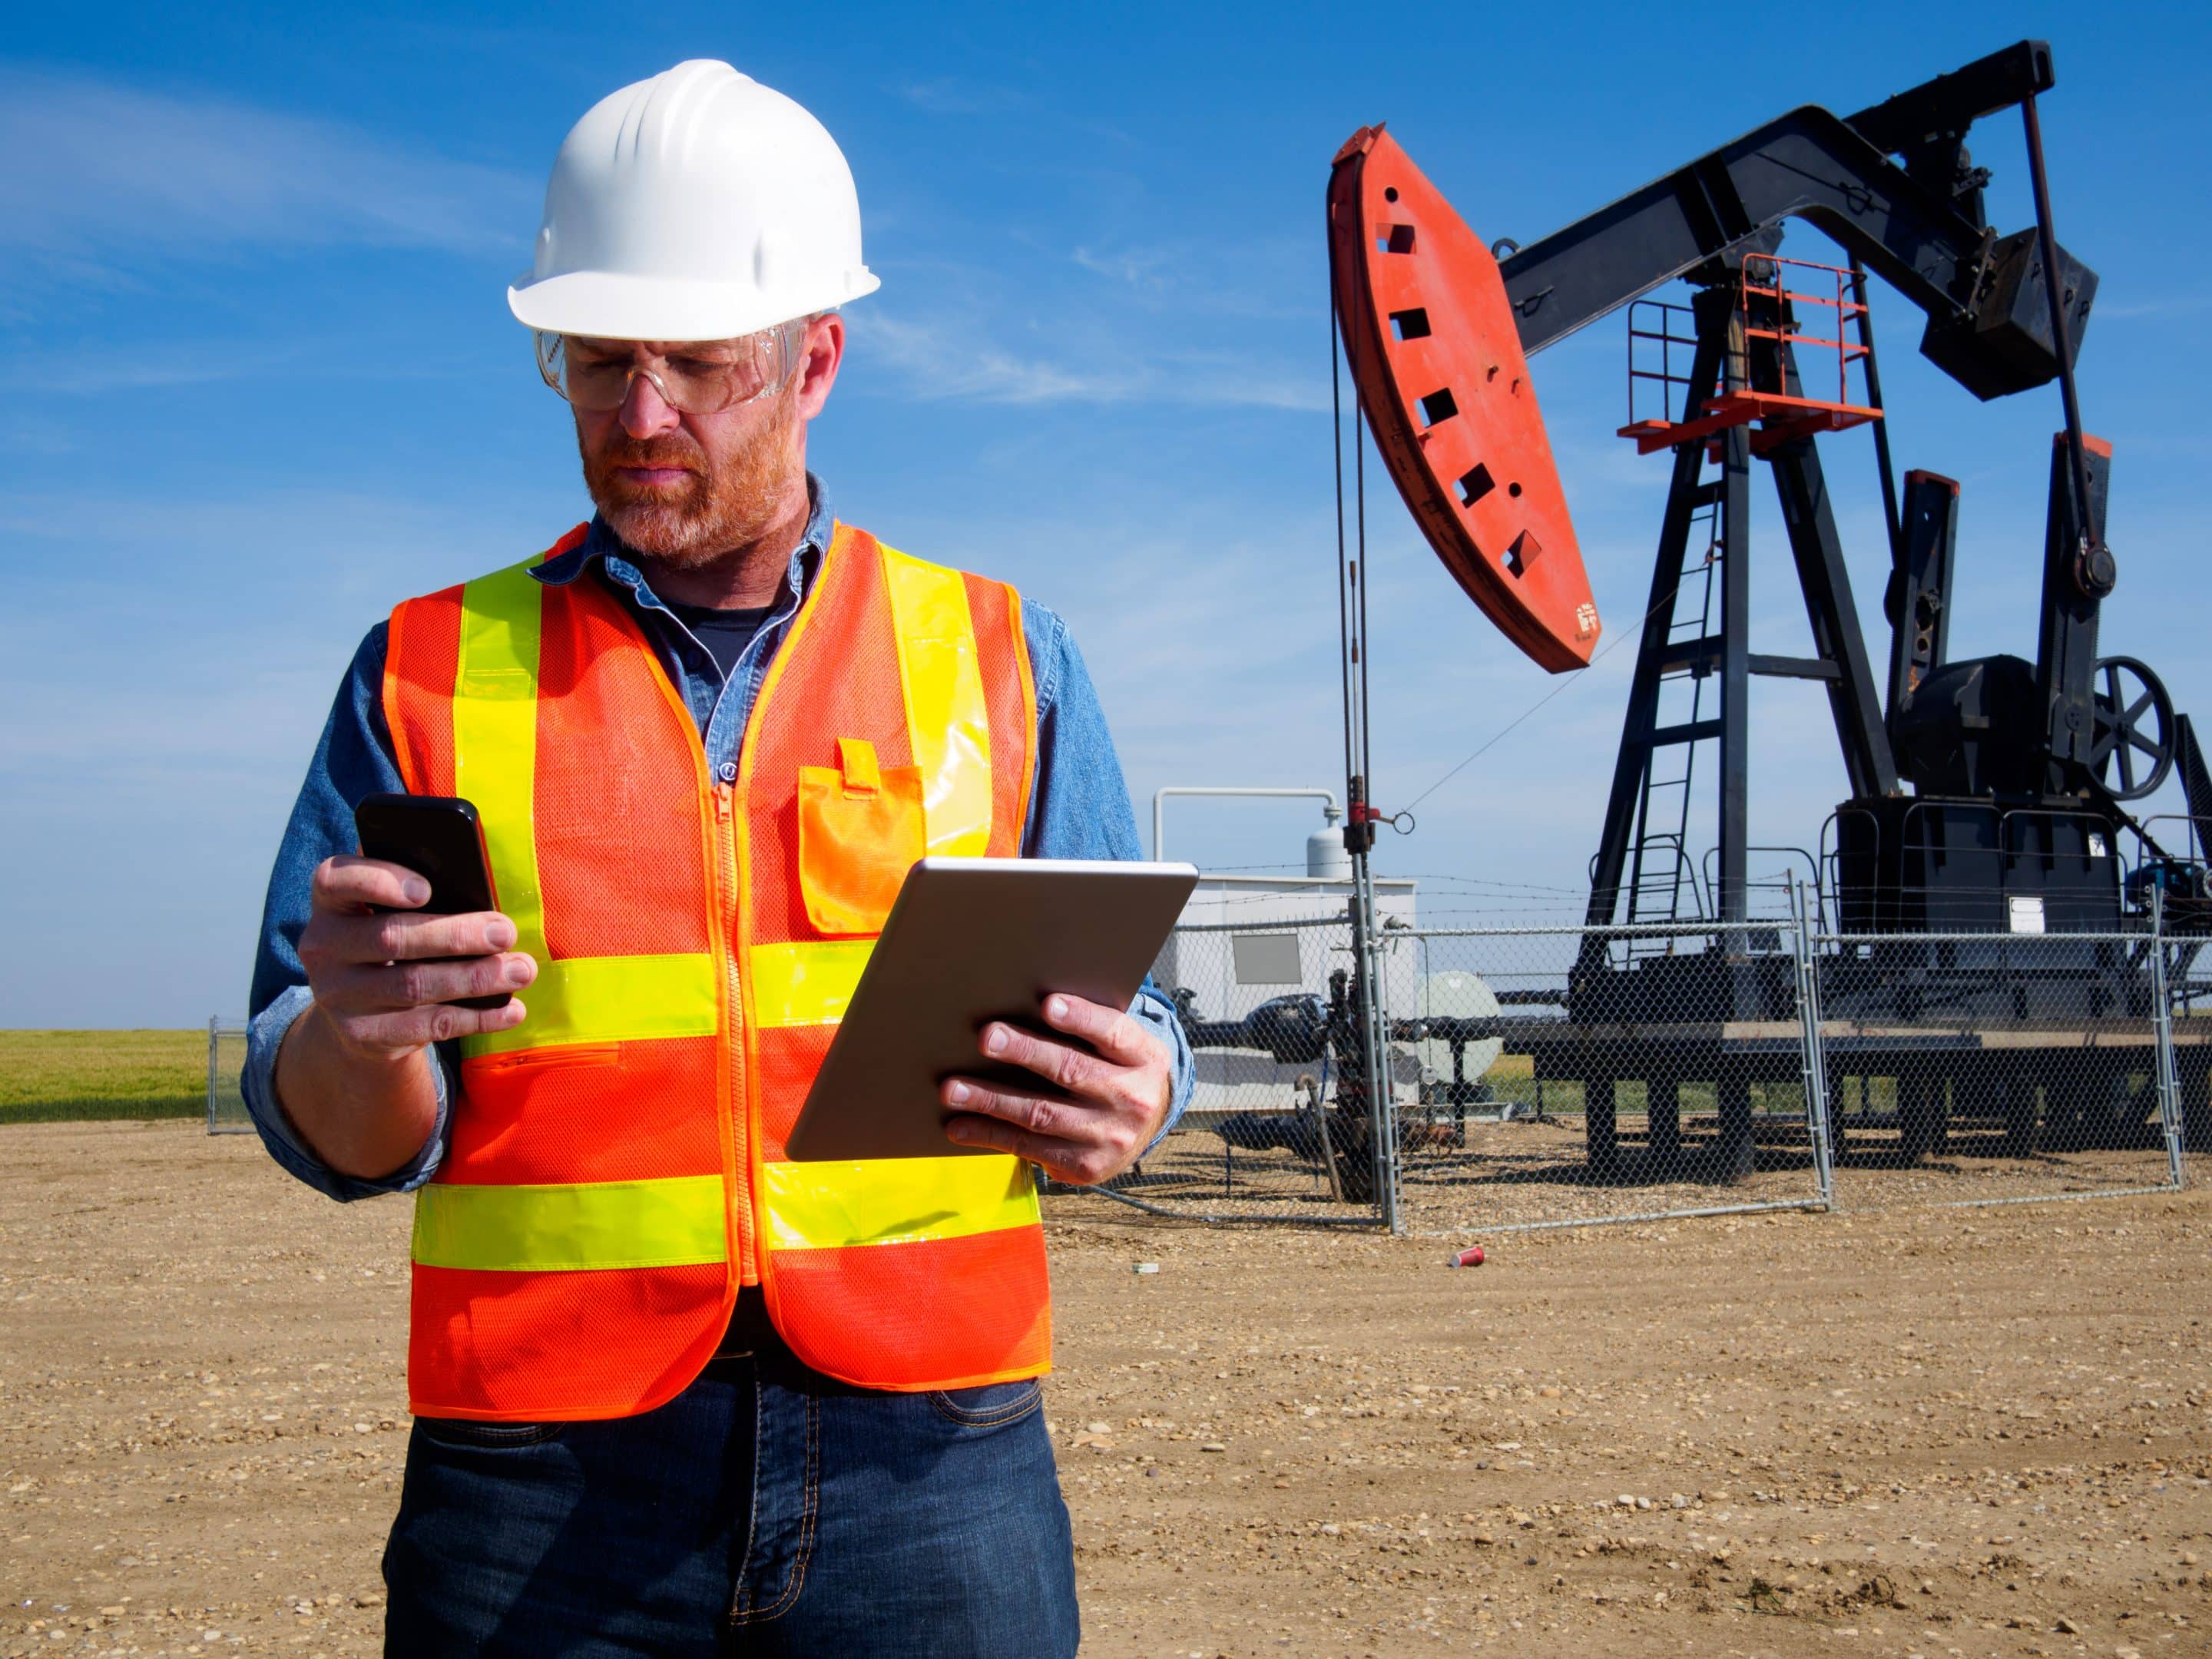 FIELD SERVICE APPLICATIONS AND FIELD SERVICE MANAGEMENT